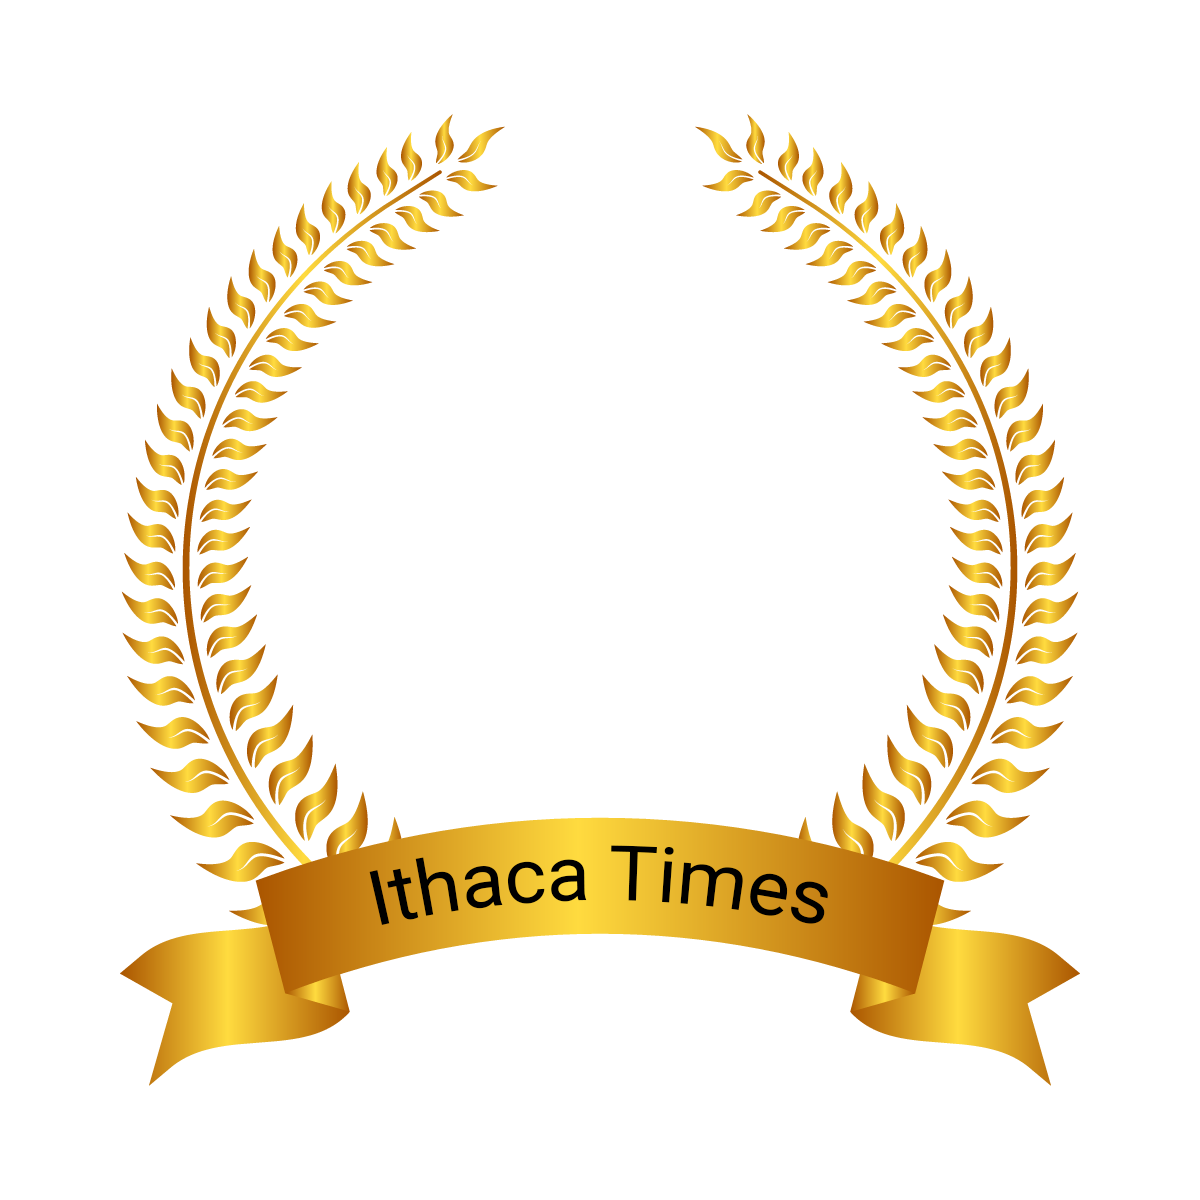 Best Entertainer - Ithaca Times 